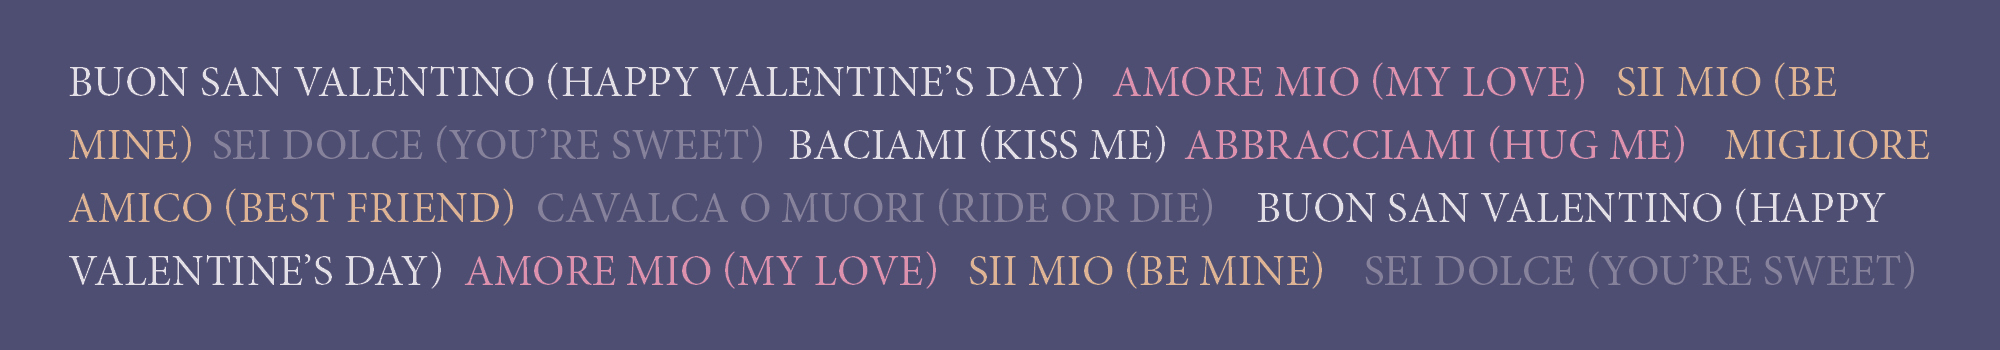 Dark purple background. Words are conversation hearts sayings in Italian with English translation in parenthesis. Sayings include: buon San Valentino (happy valentine’s day)	amore mio (my love)	Sii mio (be mine)	Sei dolce (you’re sweet)	Baciami (kiss me)	Abbracciami (hug me)		migliore amico (best friend)	cavalca o muori (ride or die)		buon San Valentino (happy valentine’s day)	amore mio (my love)	Sii mio (be mine)		Sei dolce (you’re sweet)